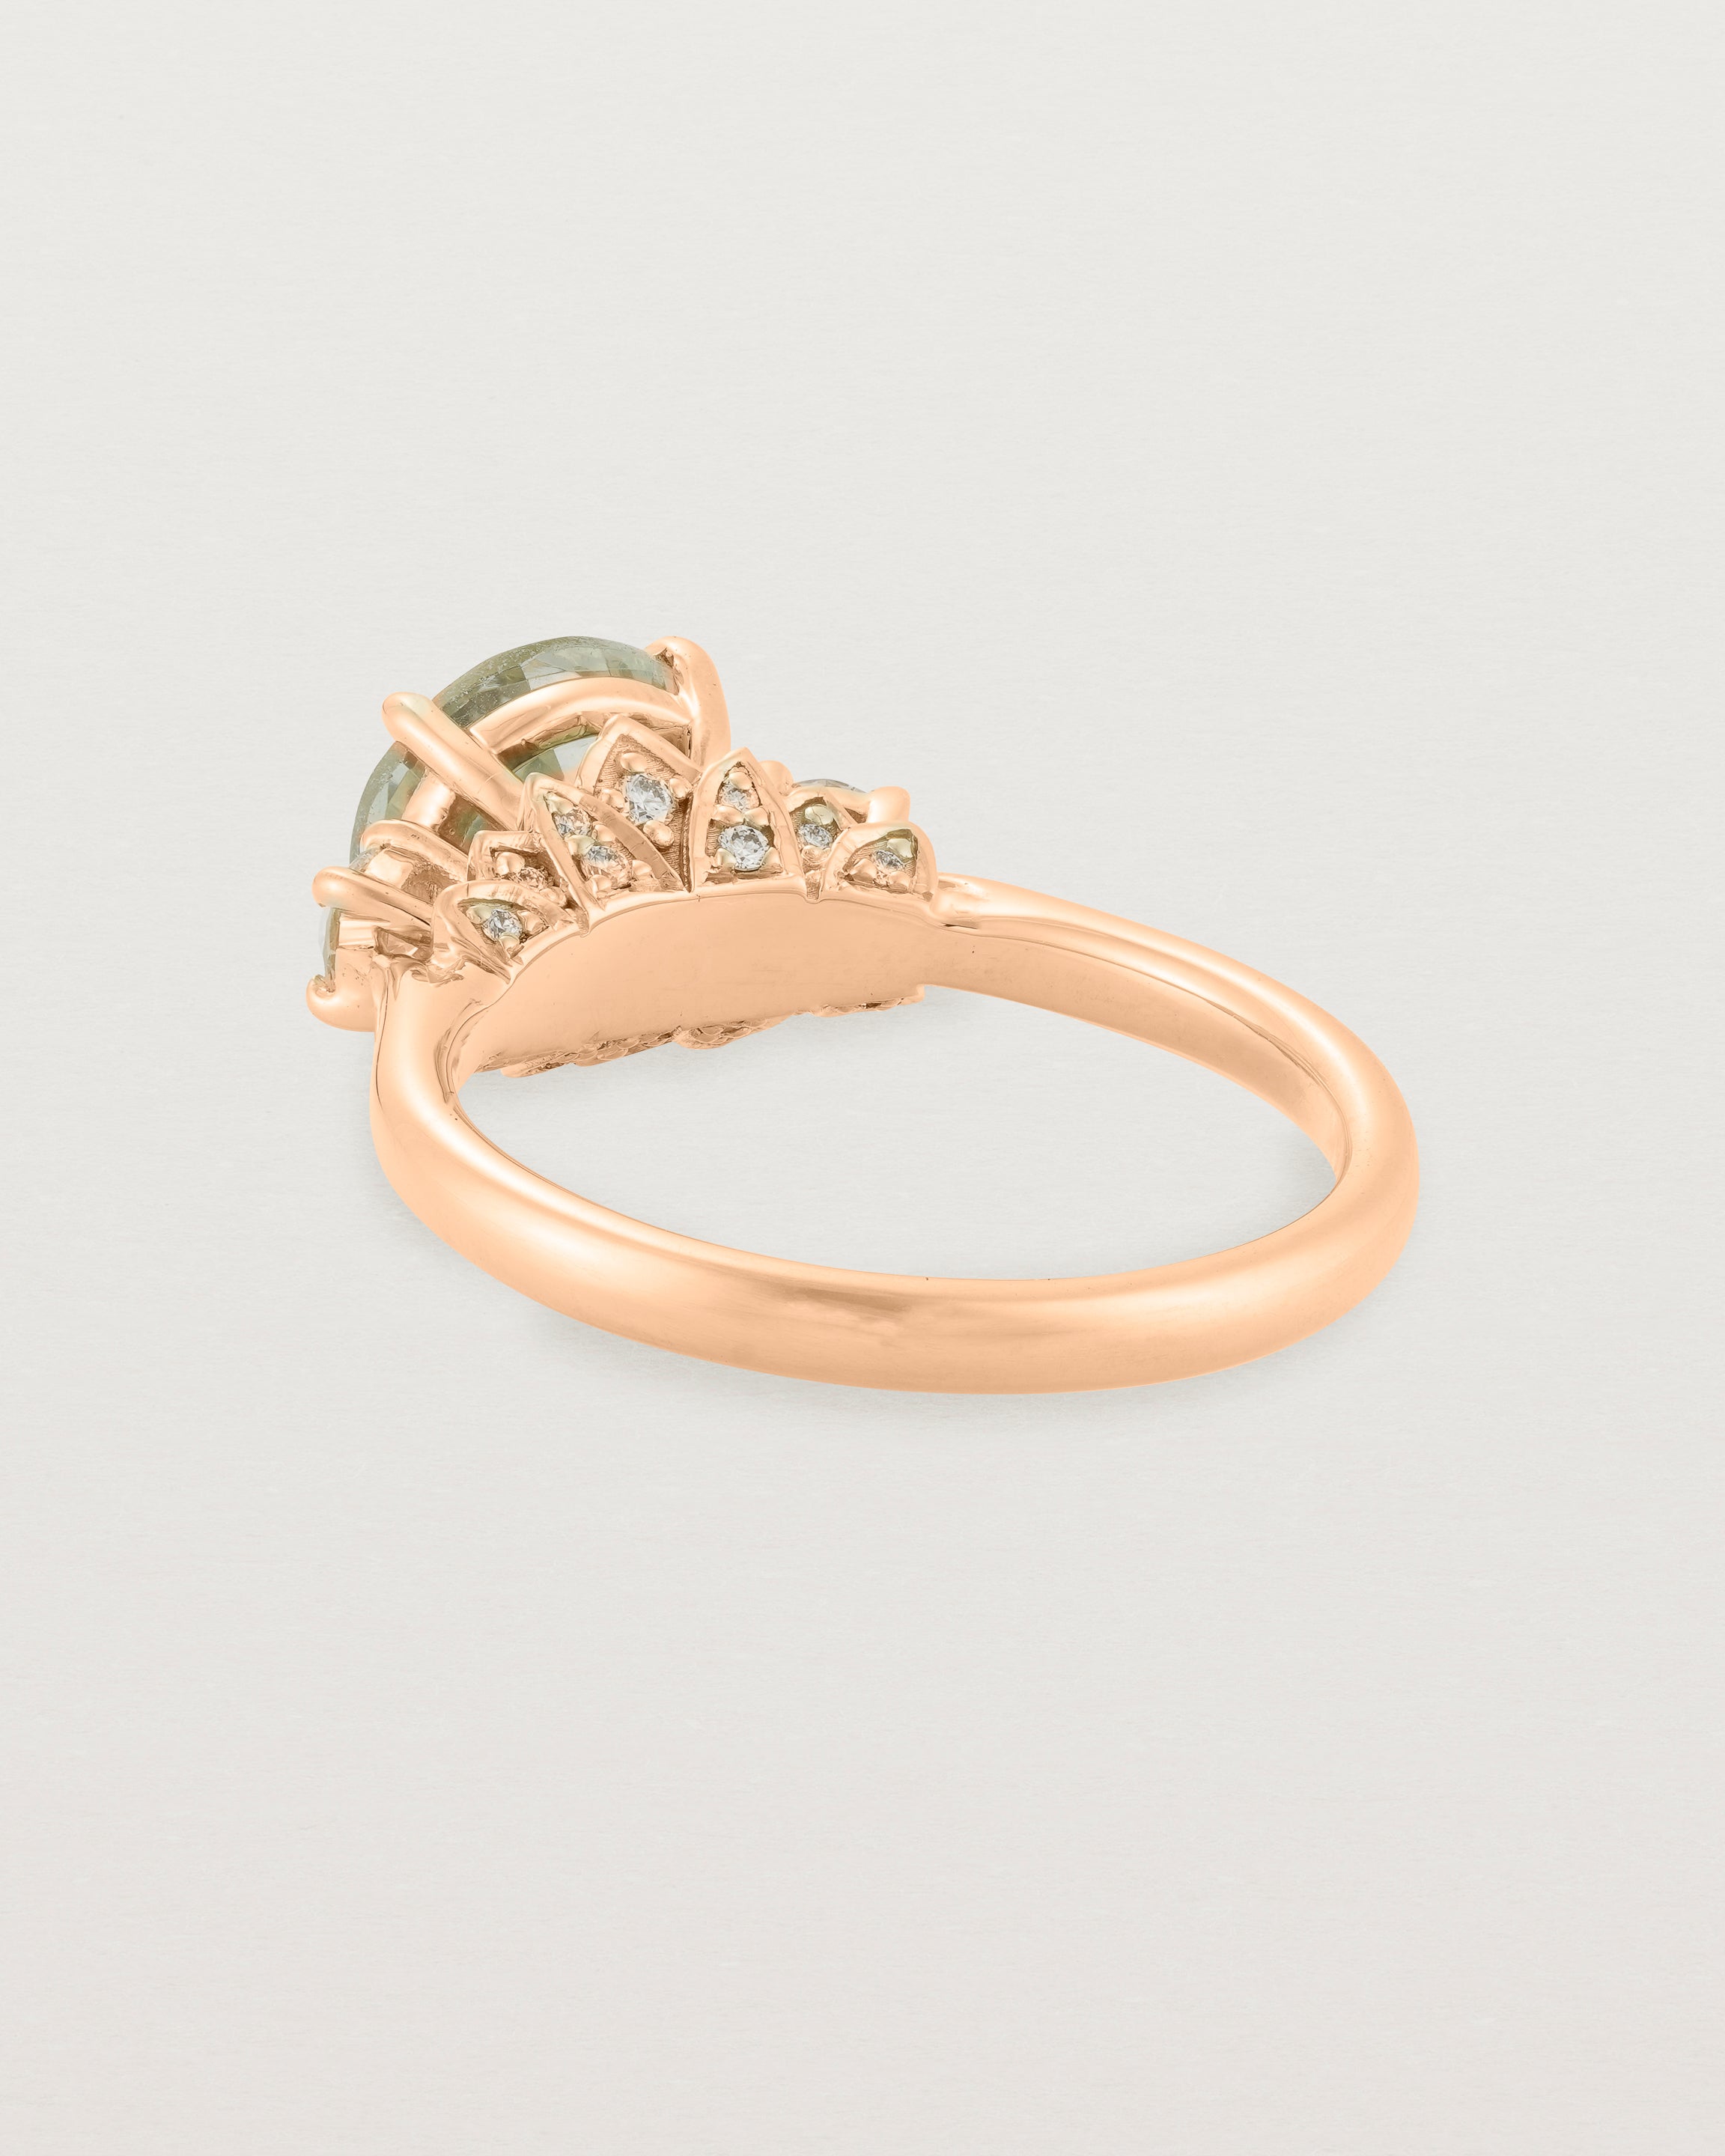 Back view of the Laurel Round Trio Ring | Green Amethyst | Rose Gold.